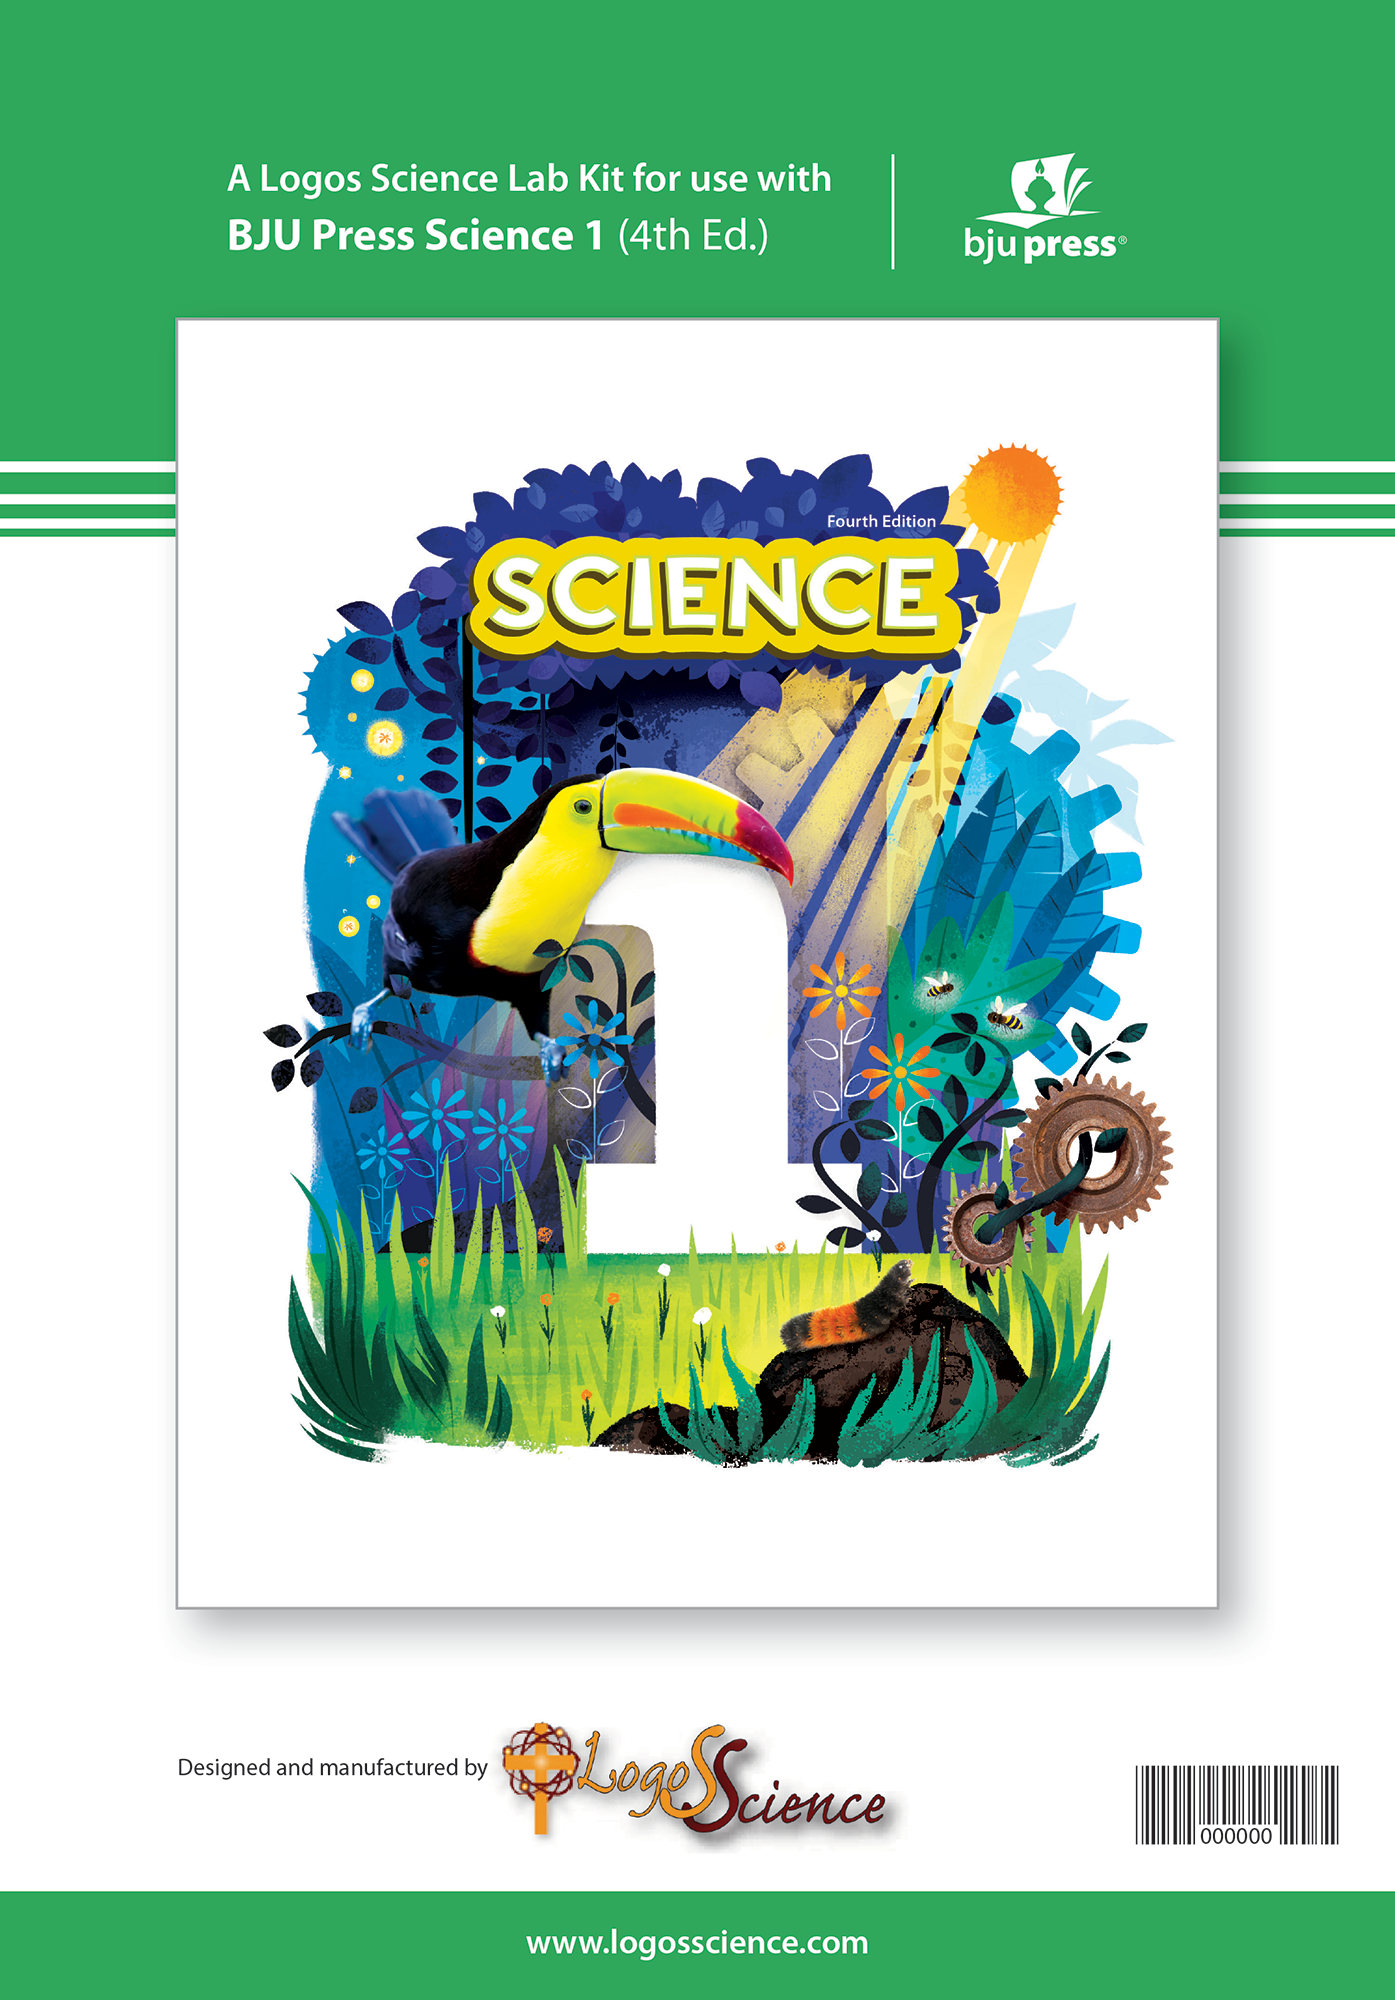 Logos Science Lab Kit for Science 1, 4th ed.